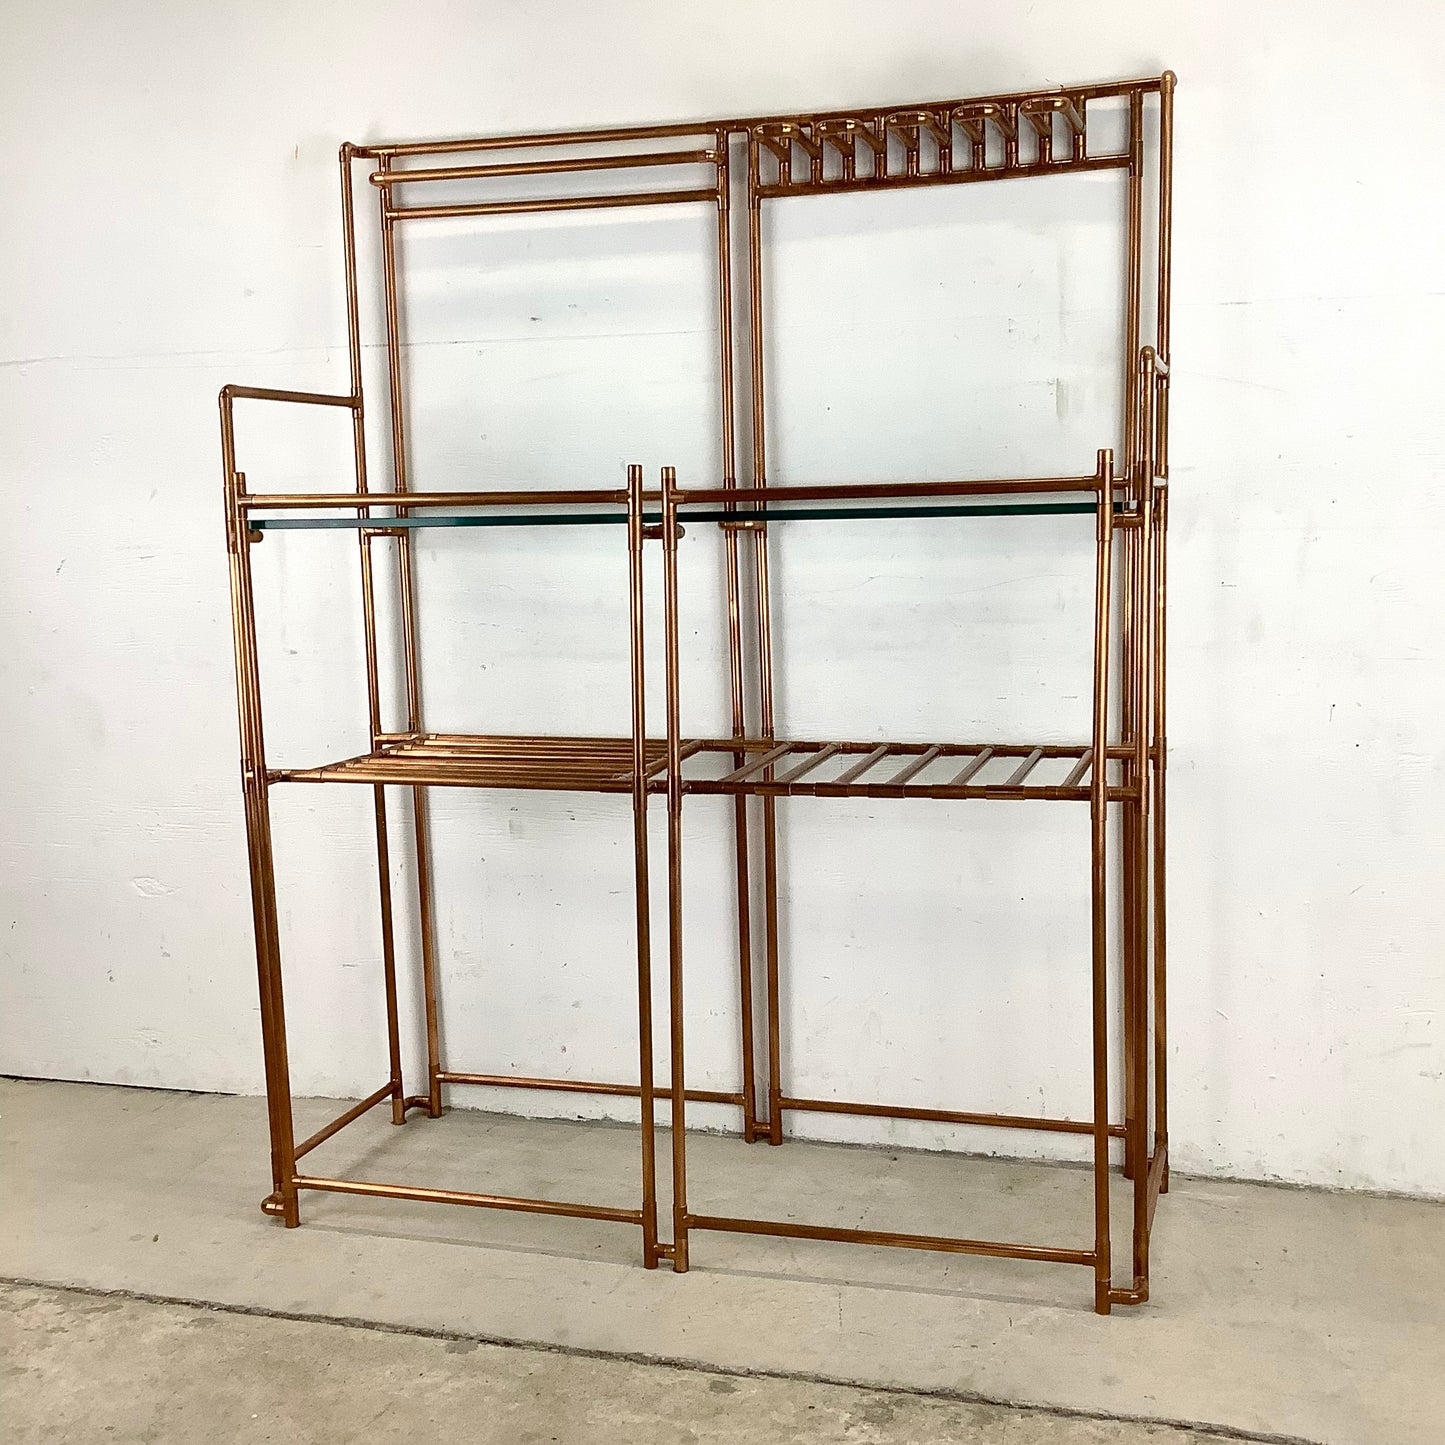 Unique Copper Pipe Baker's Rack with Glass Counter